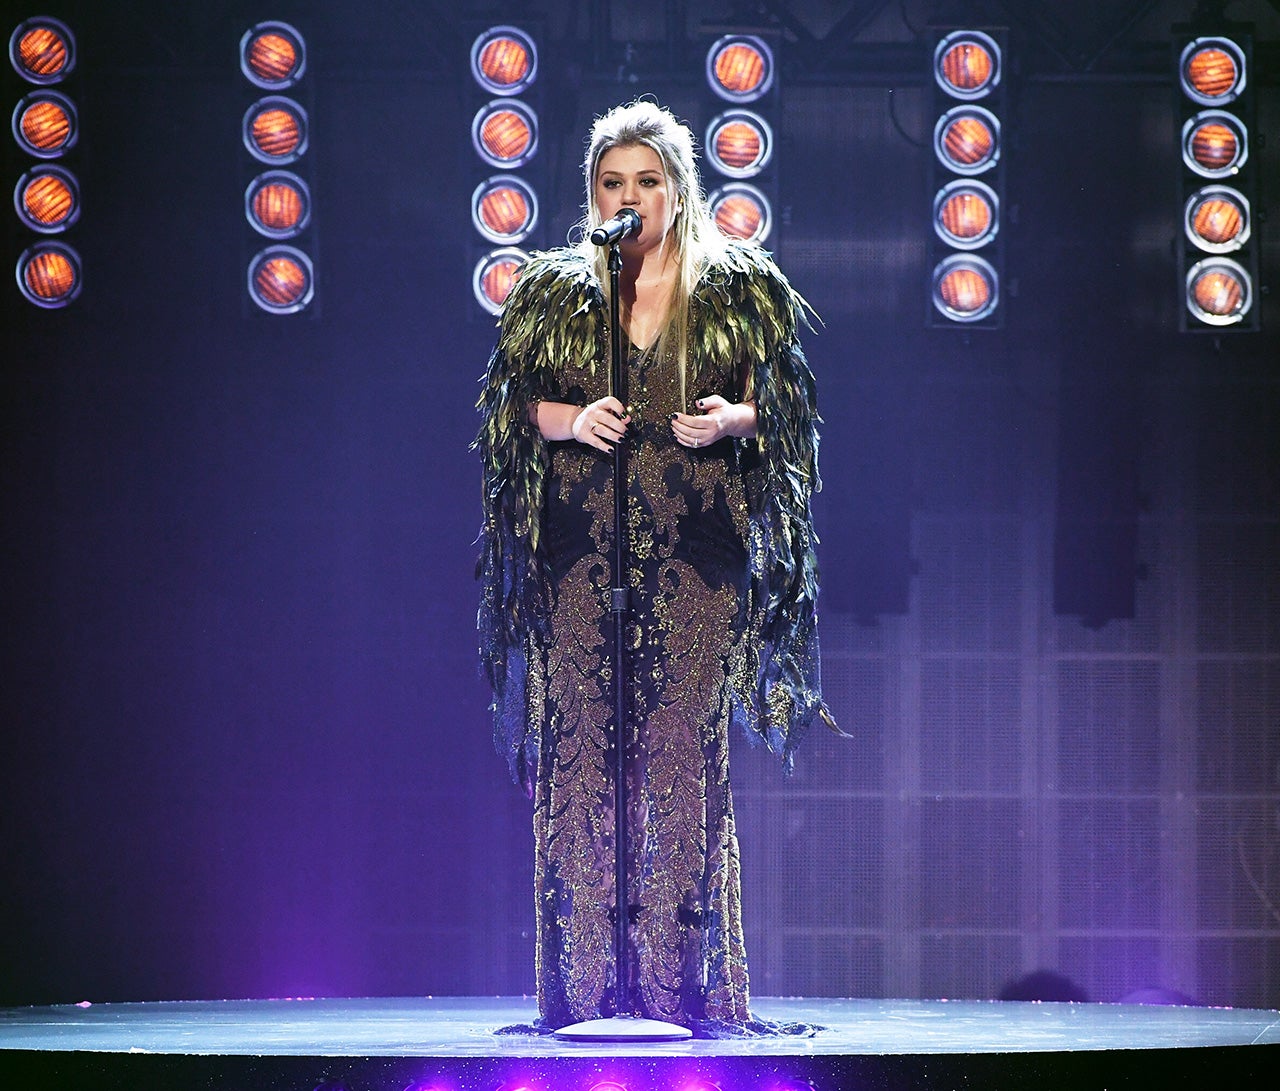 Kelly Clarkson at the AMAs